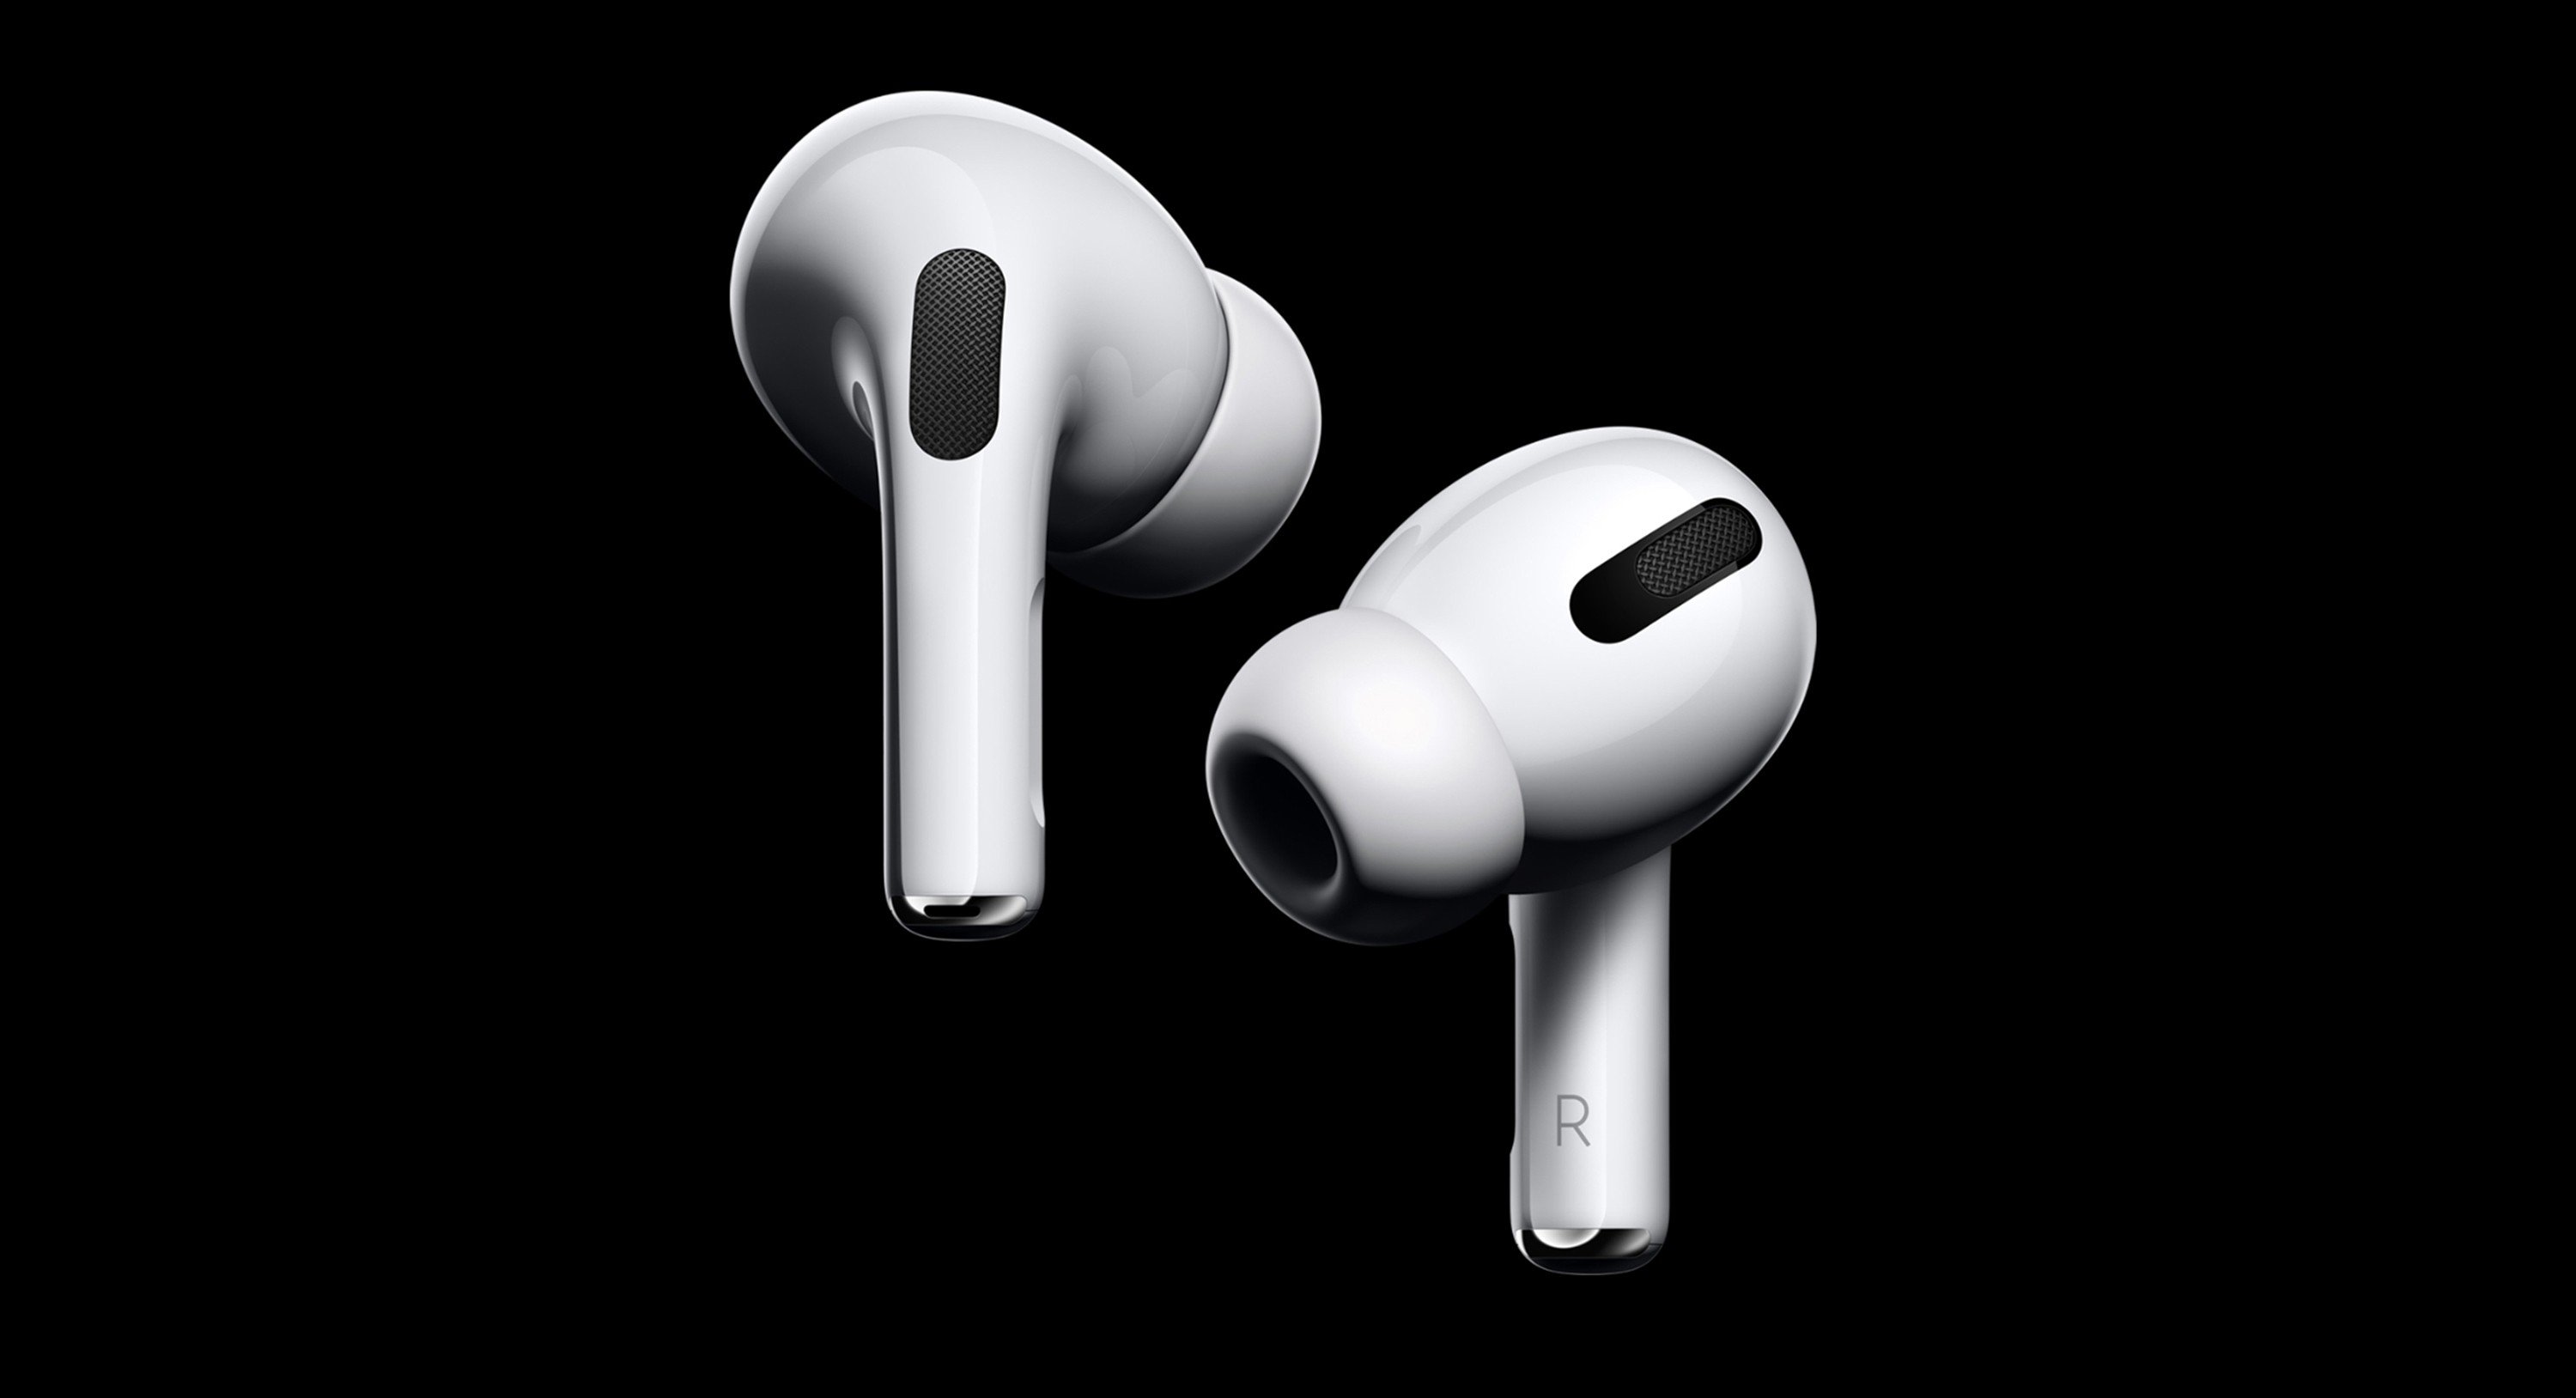 Apple’s latest wireless earbuds feature active noise cancellation powered by an in-house chip called the H1. Photo: Handout